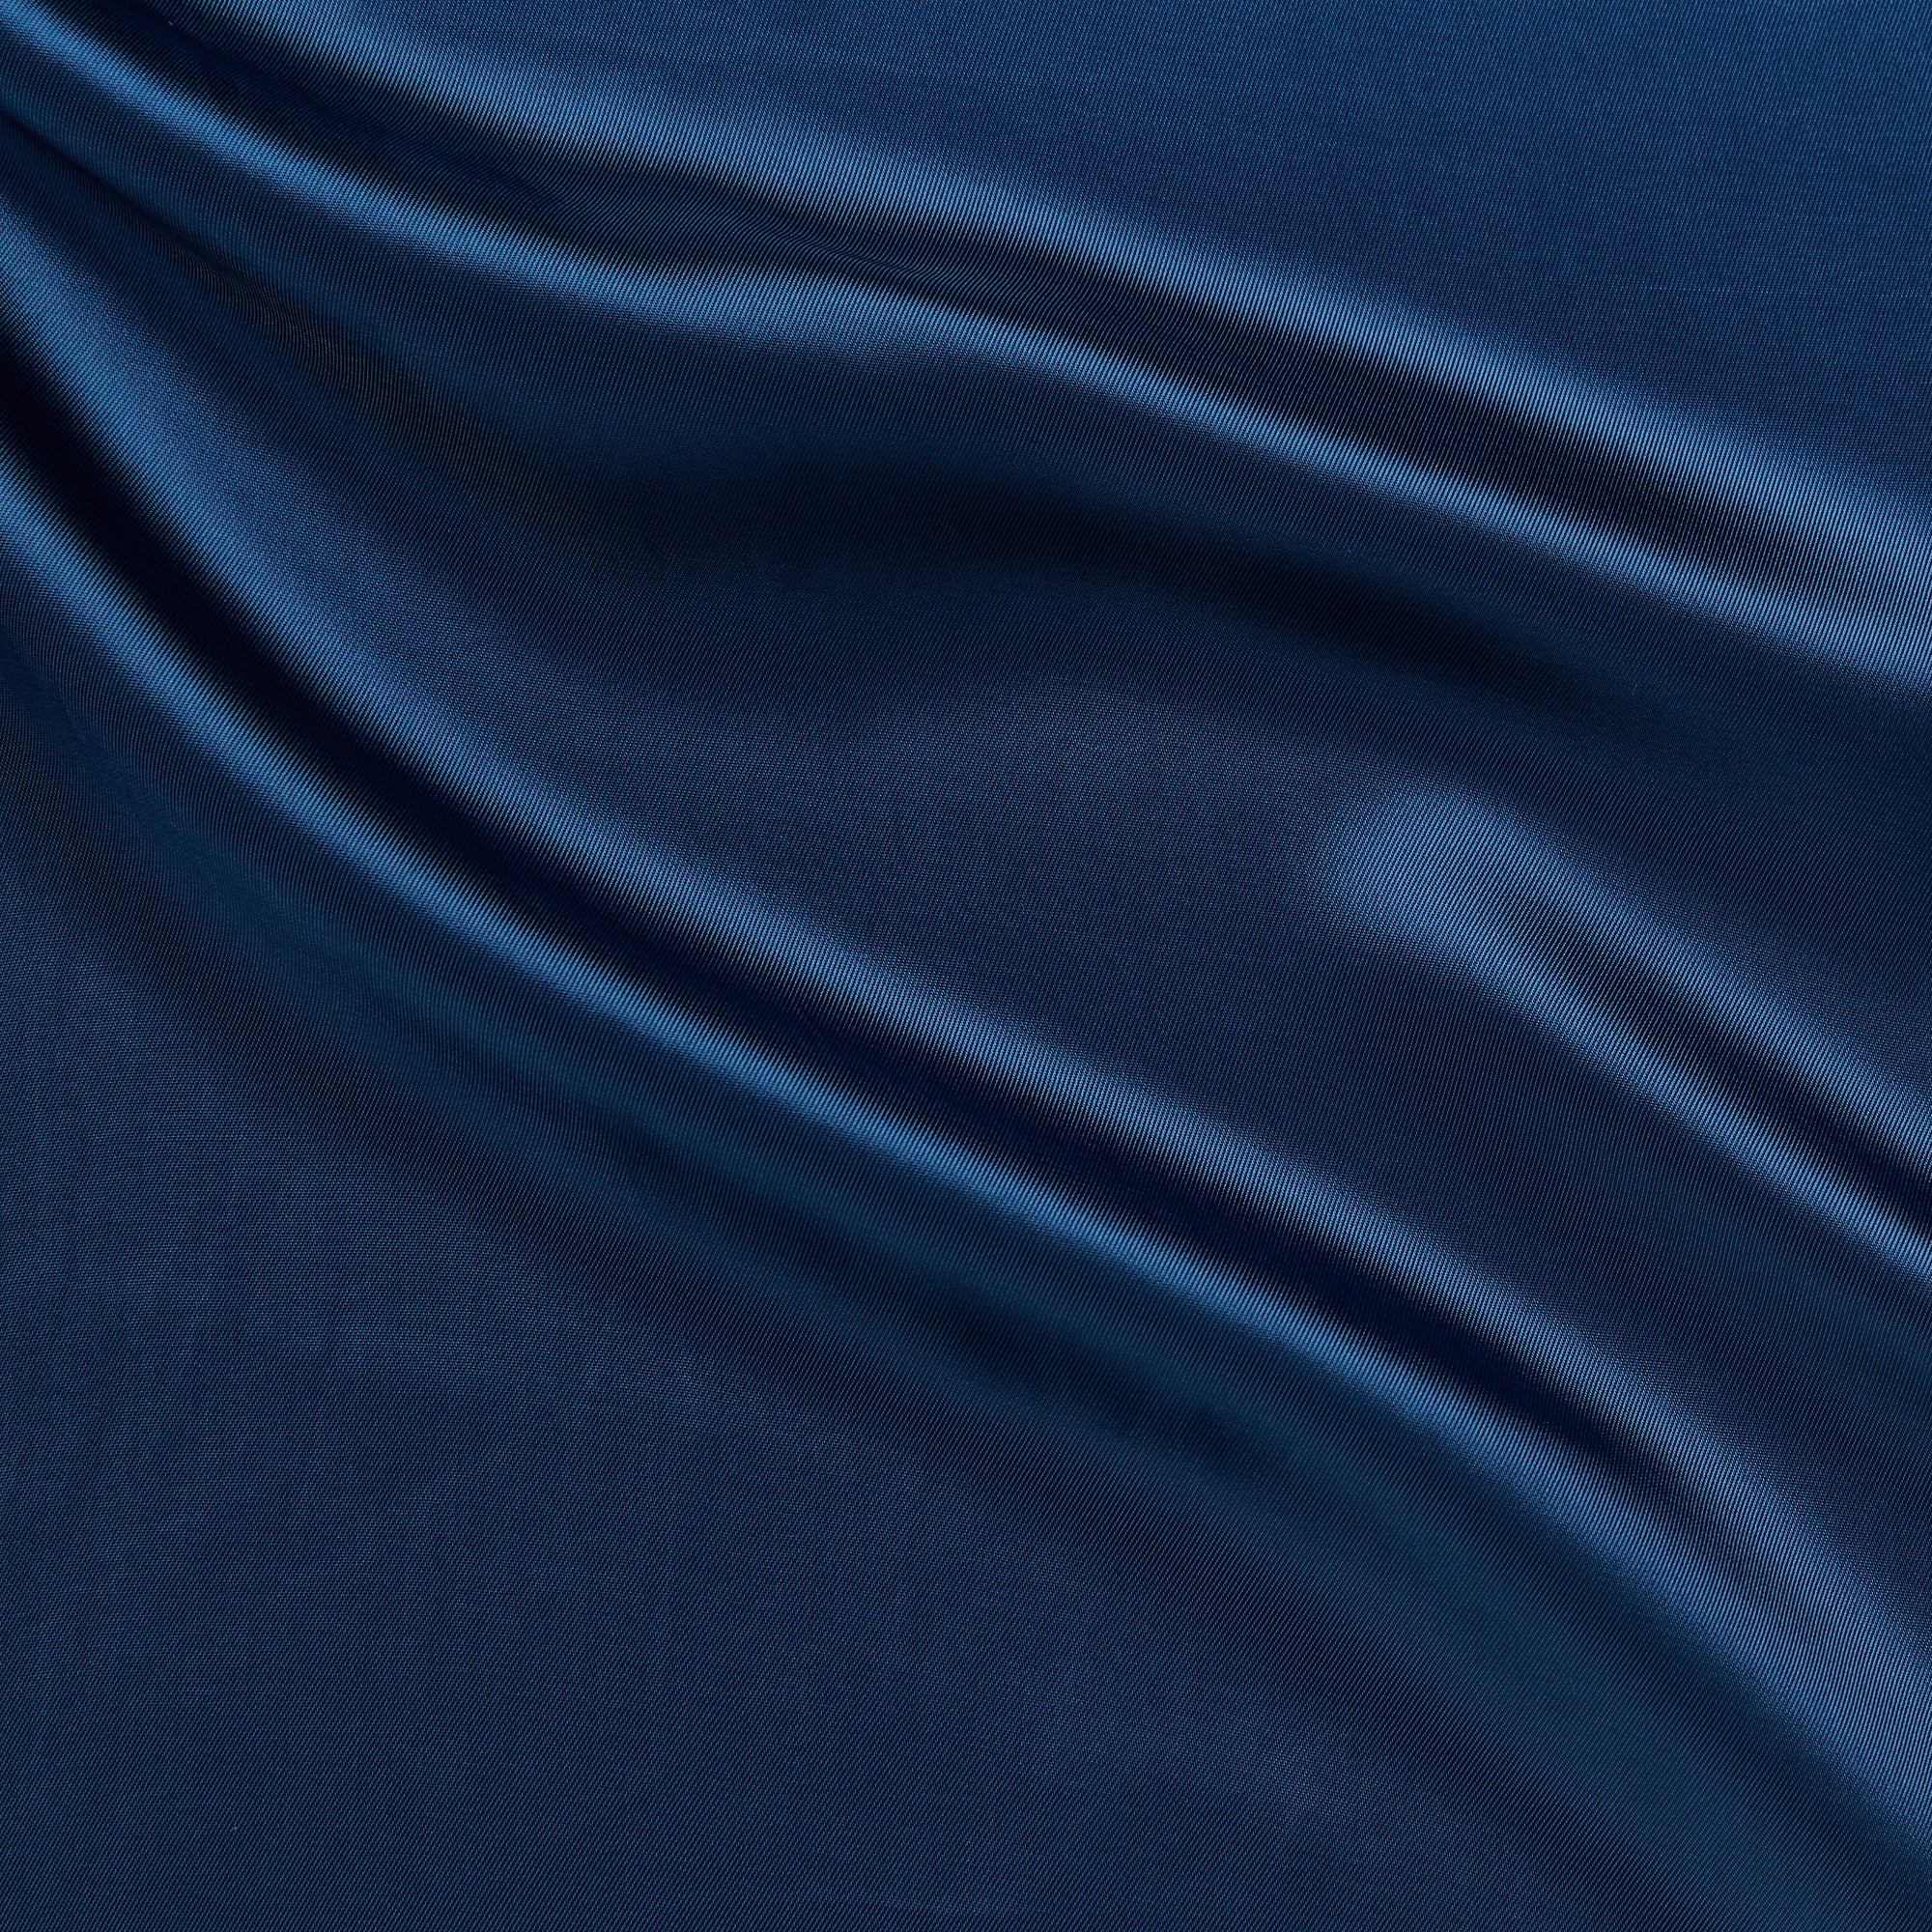 saga displaying the cobalt color version of a pure rayon Fine twill satin with fluid drape